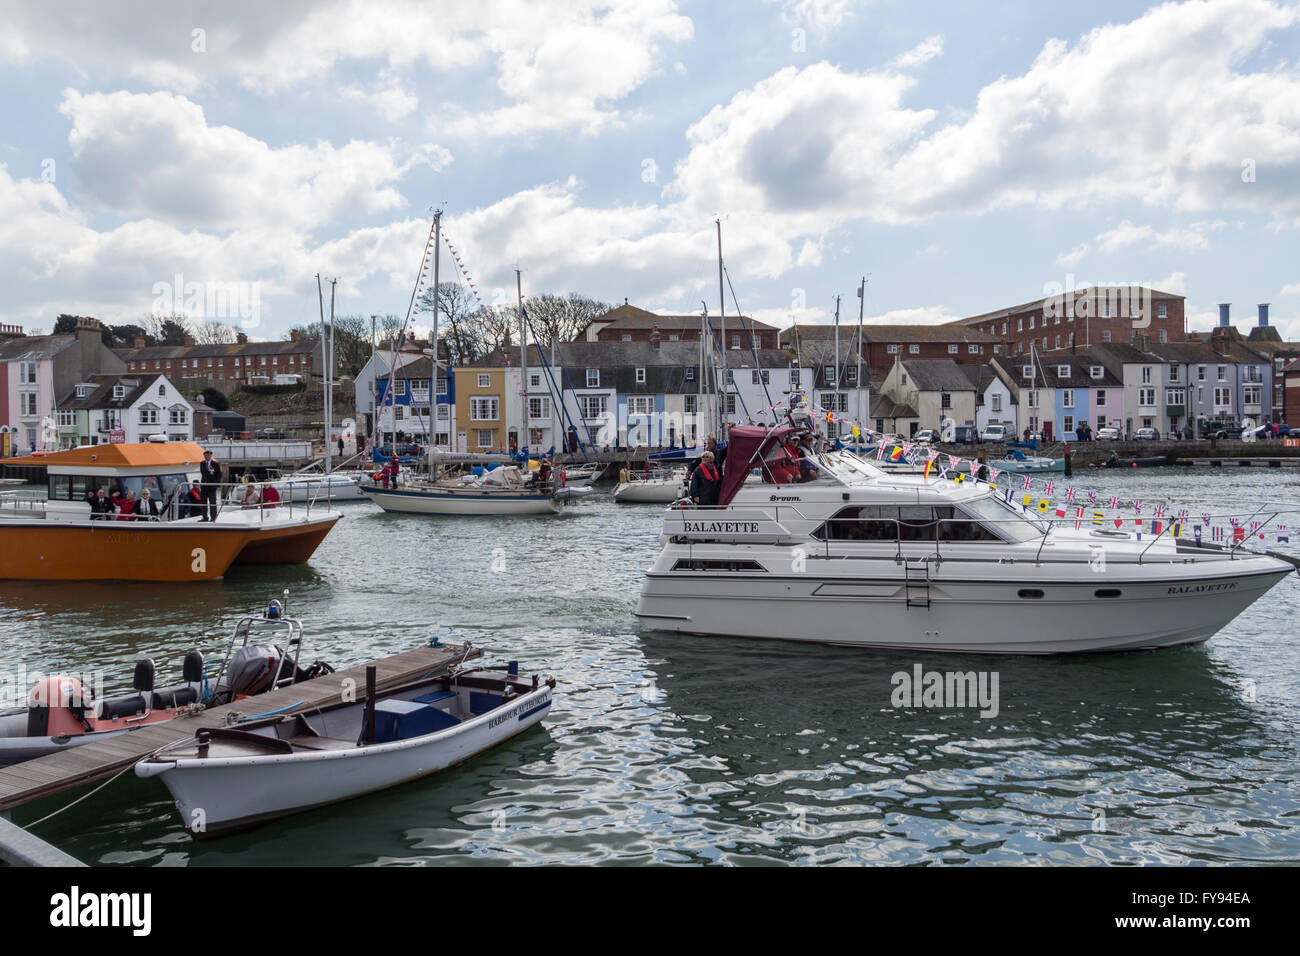 Weymouth, England. 23 April 2016. Queen's 90th Birthday Floating Tribute. Balayette in harbour. Credit:  Frances Underwood/Alamy Live News Stock Photo